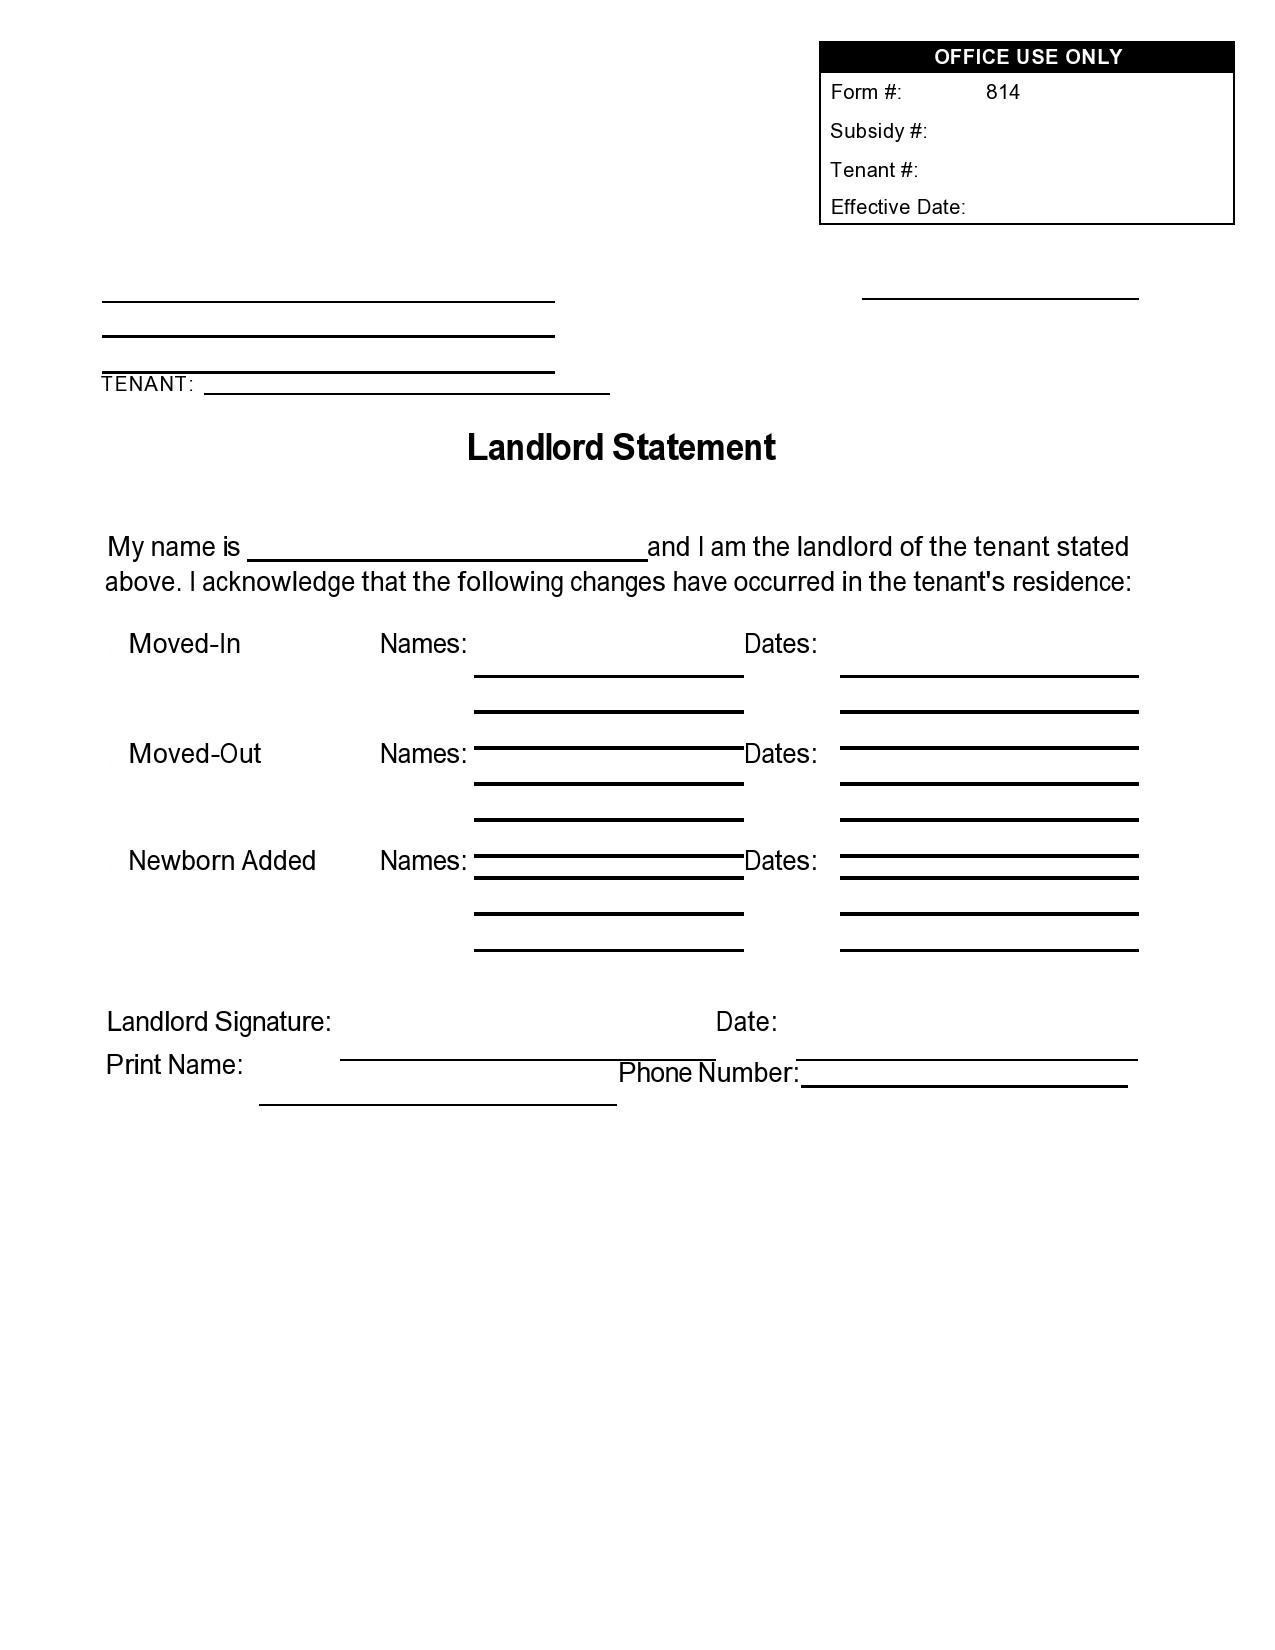 43-perfect-landlord-statement-forms-letters-templatelab